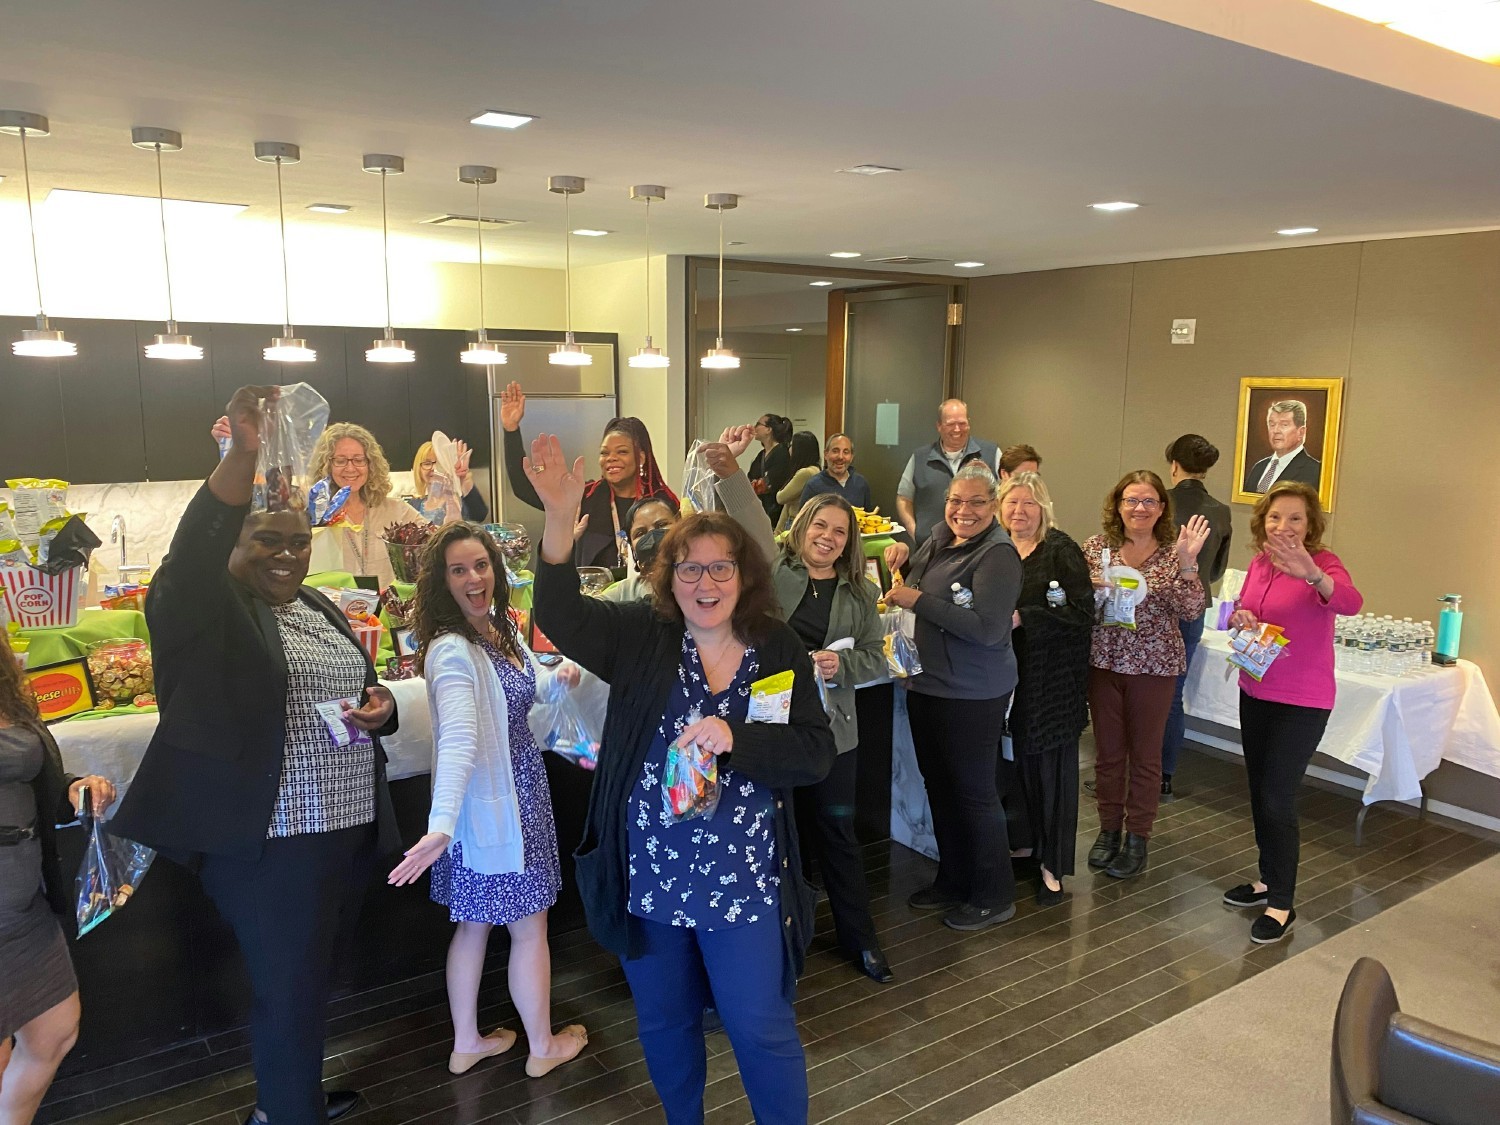 Employees gather in the firm lounge to connect and grab fun snacks during our Wellness Week in Law celebration.